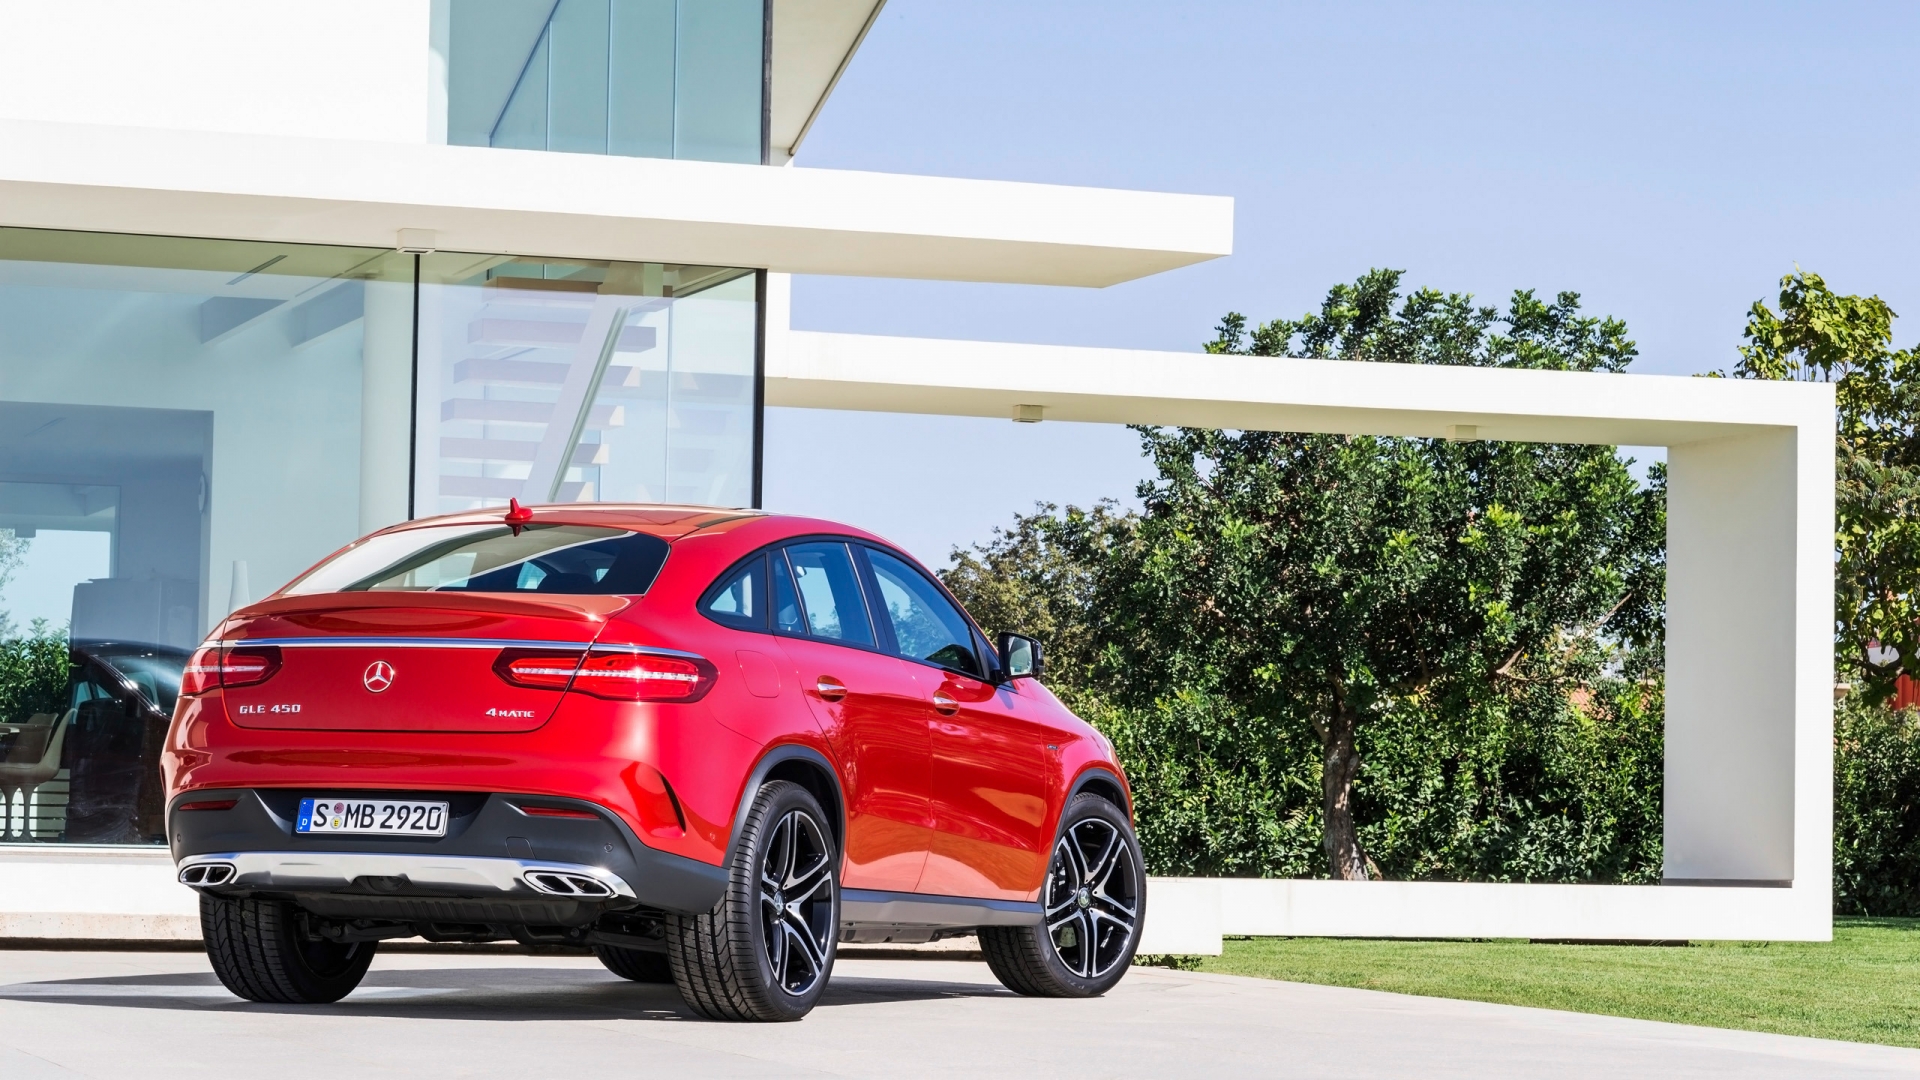 Mercedes Benz GLE Coupe Back View for 1920 x 1080 HDTV 1080p resolution